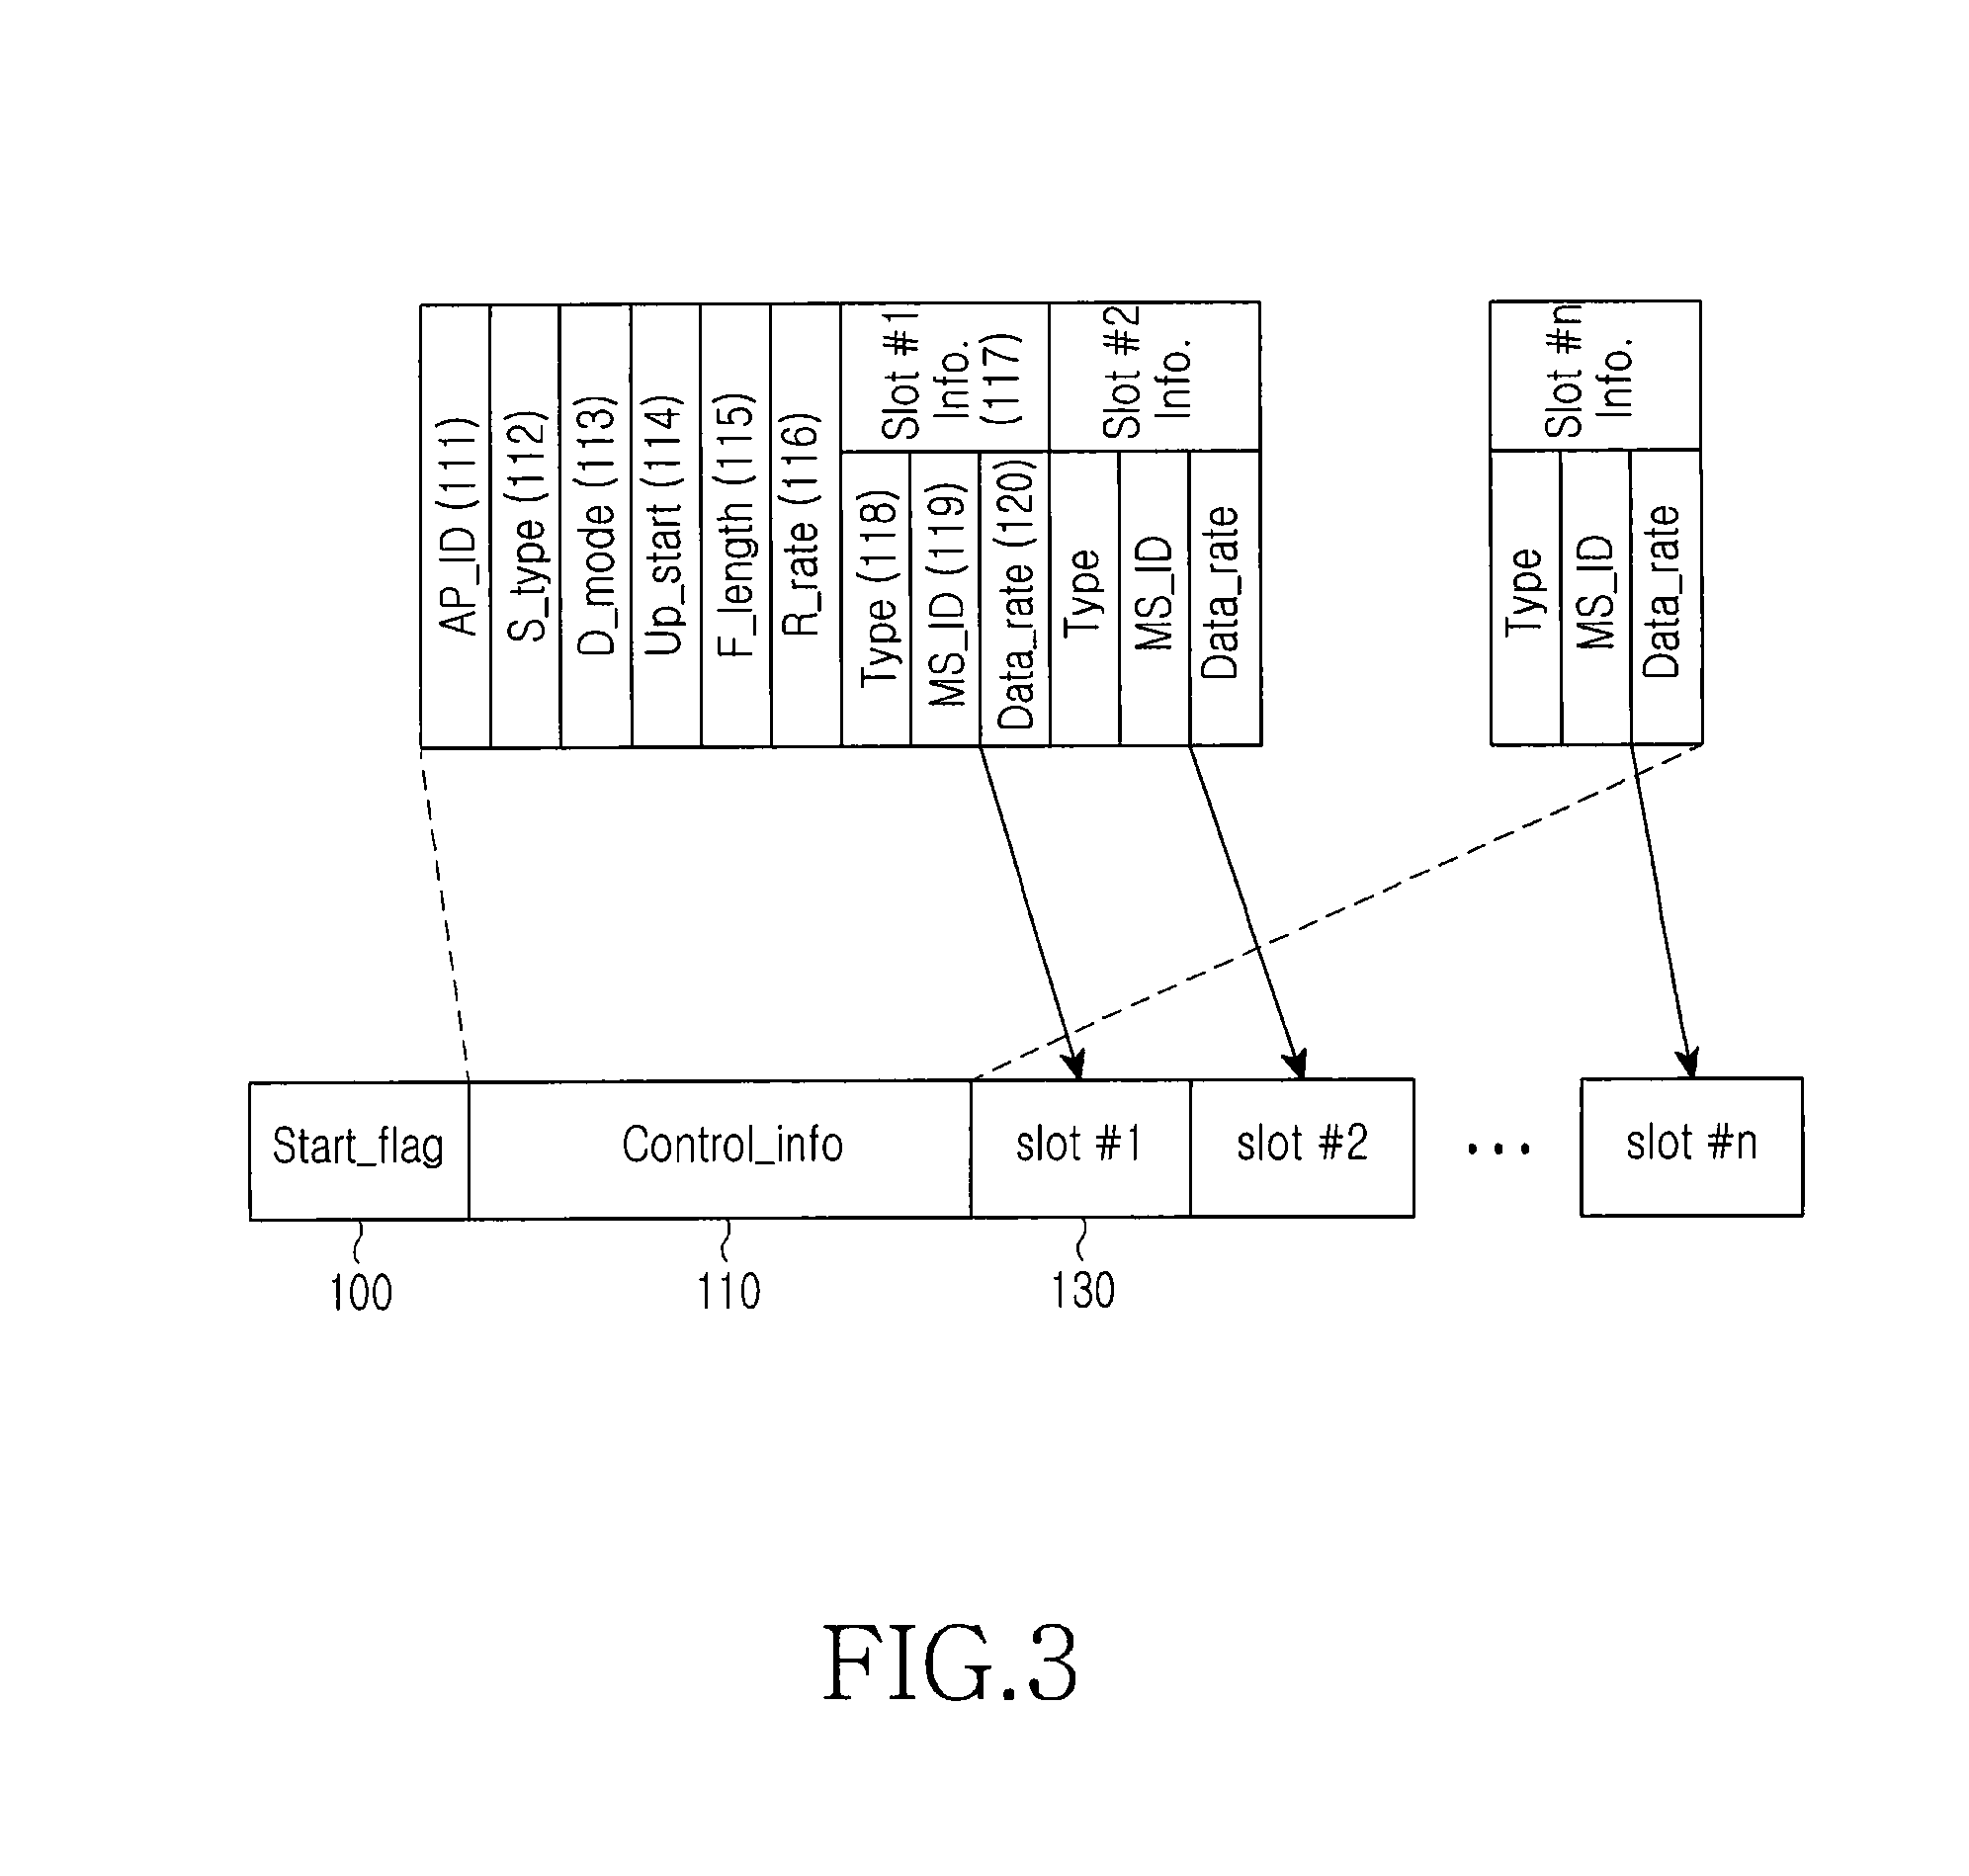 Visible light communication method and system